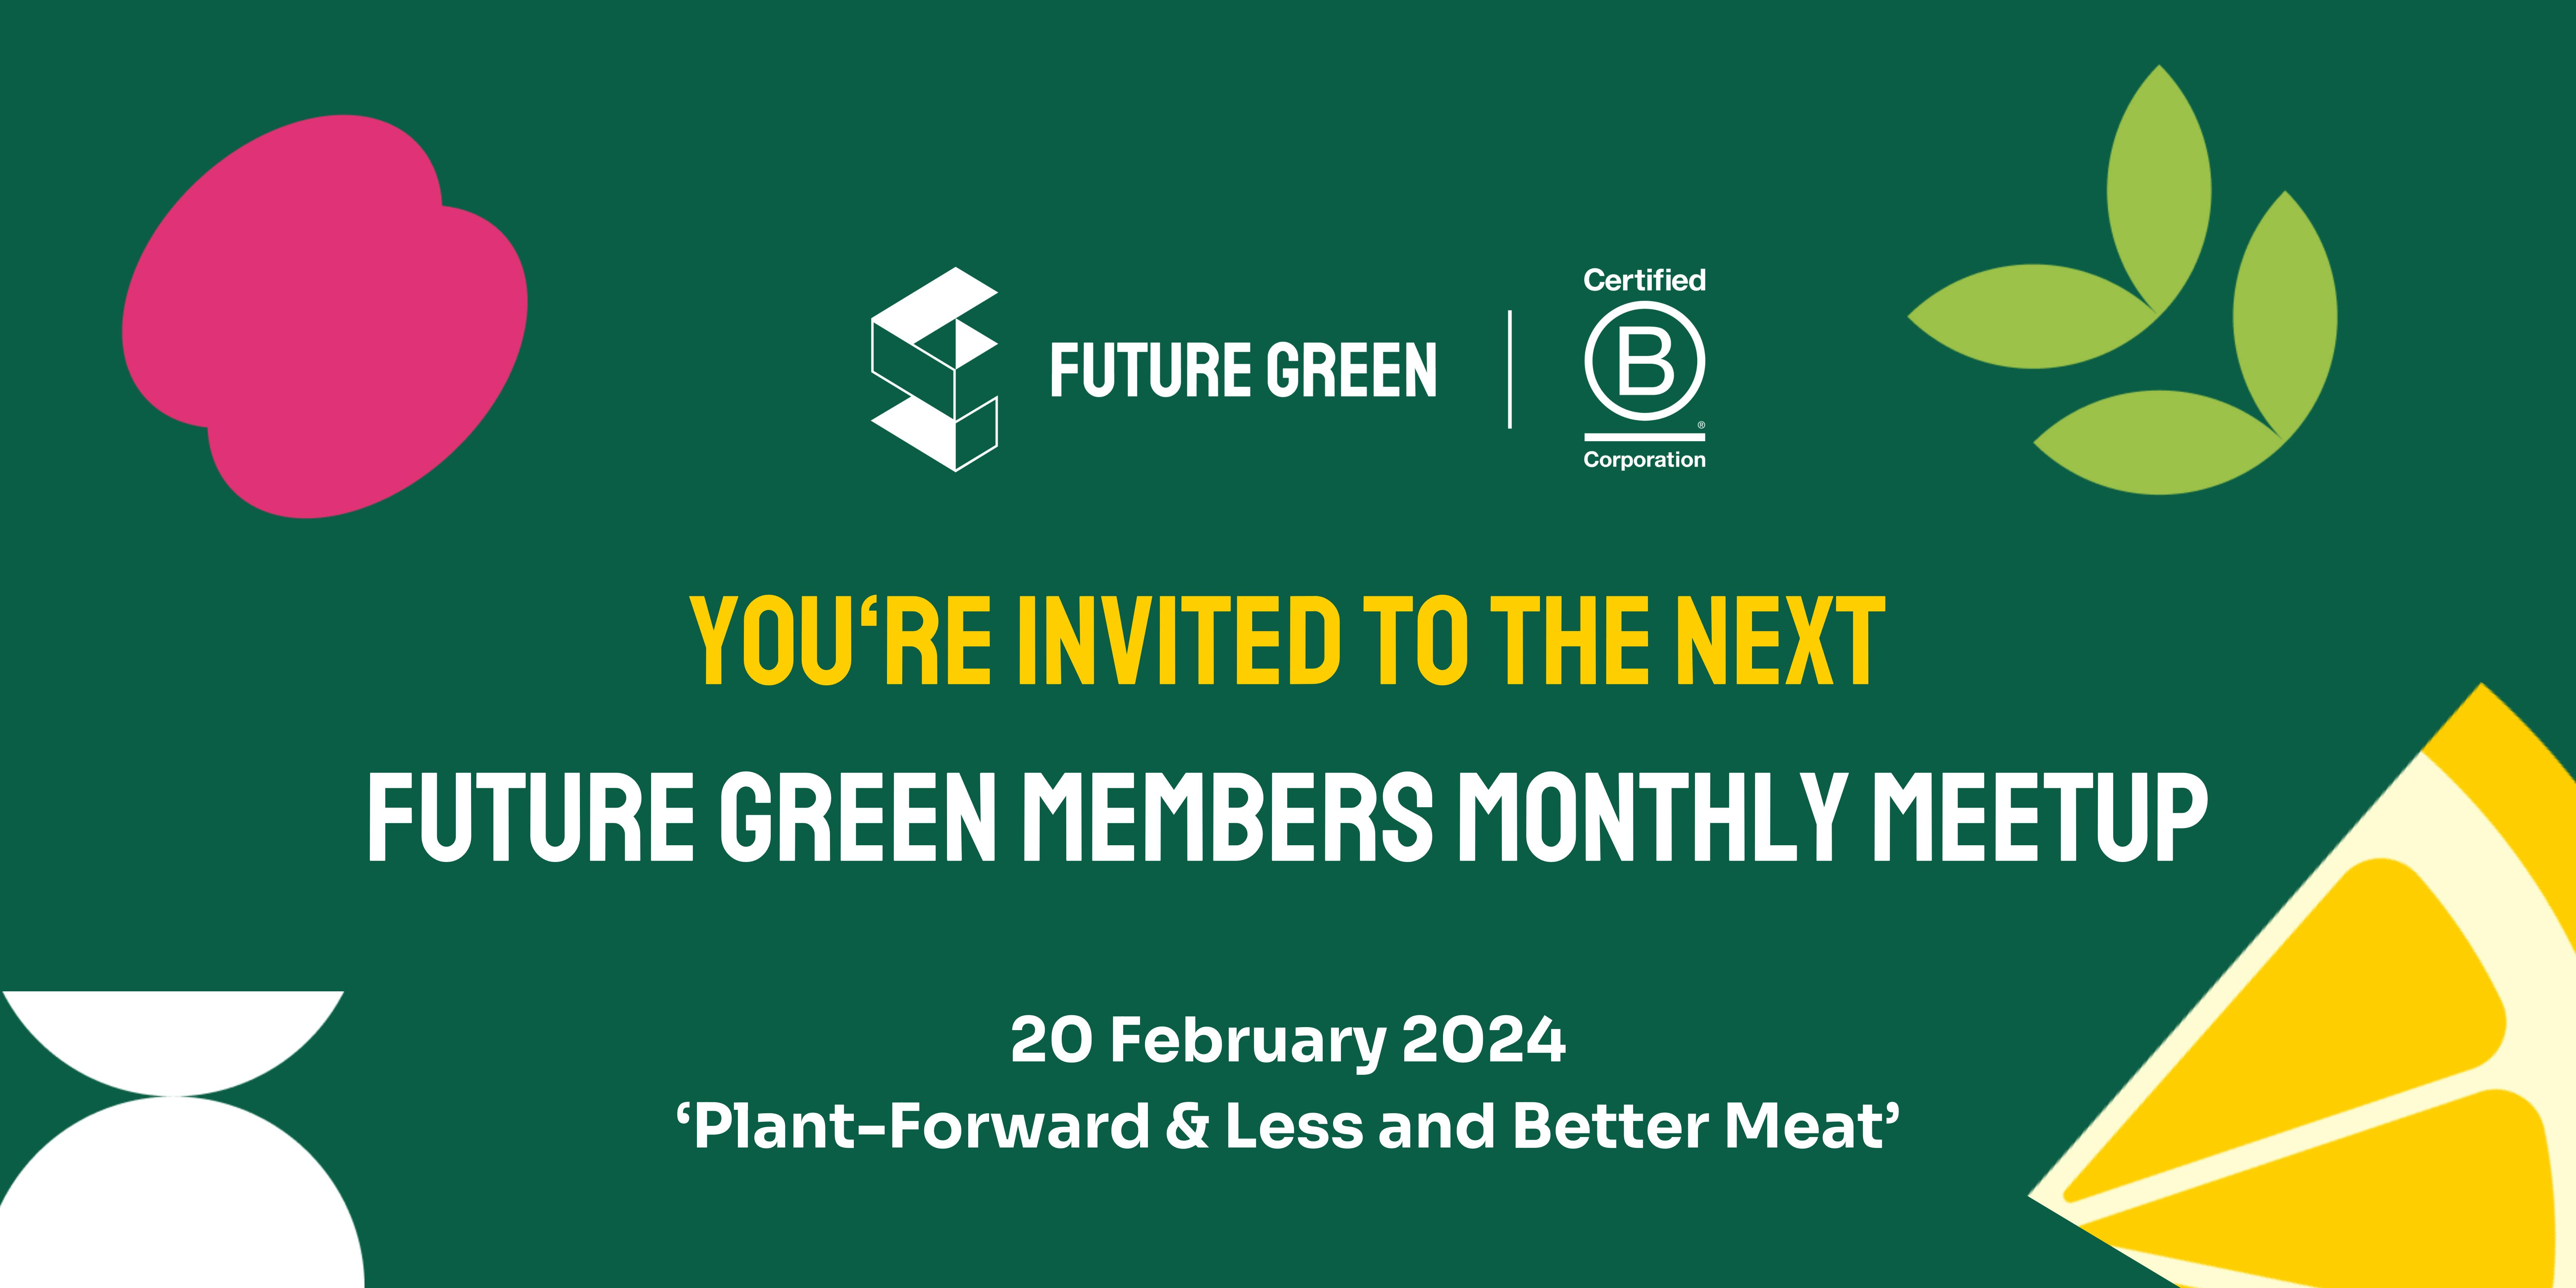 Join us on the 20th of February at our Future Green Members Meetup